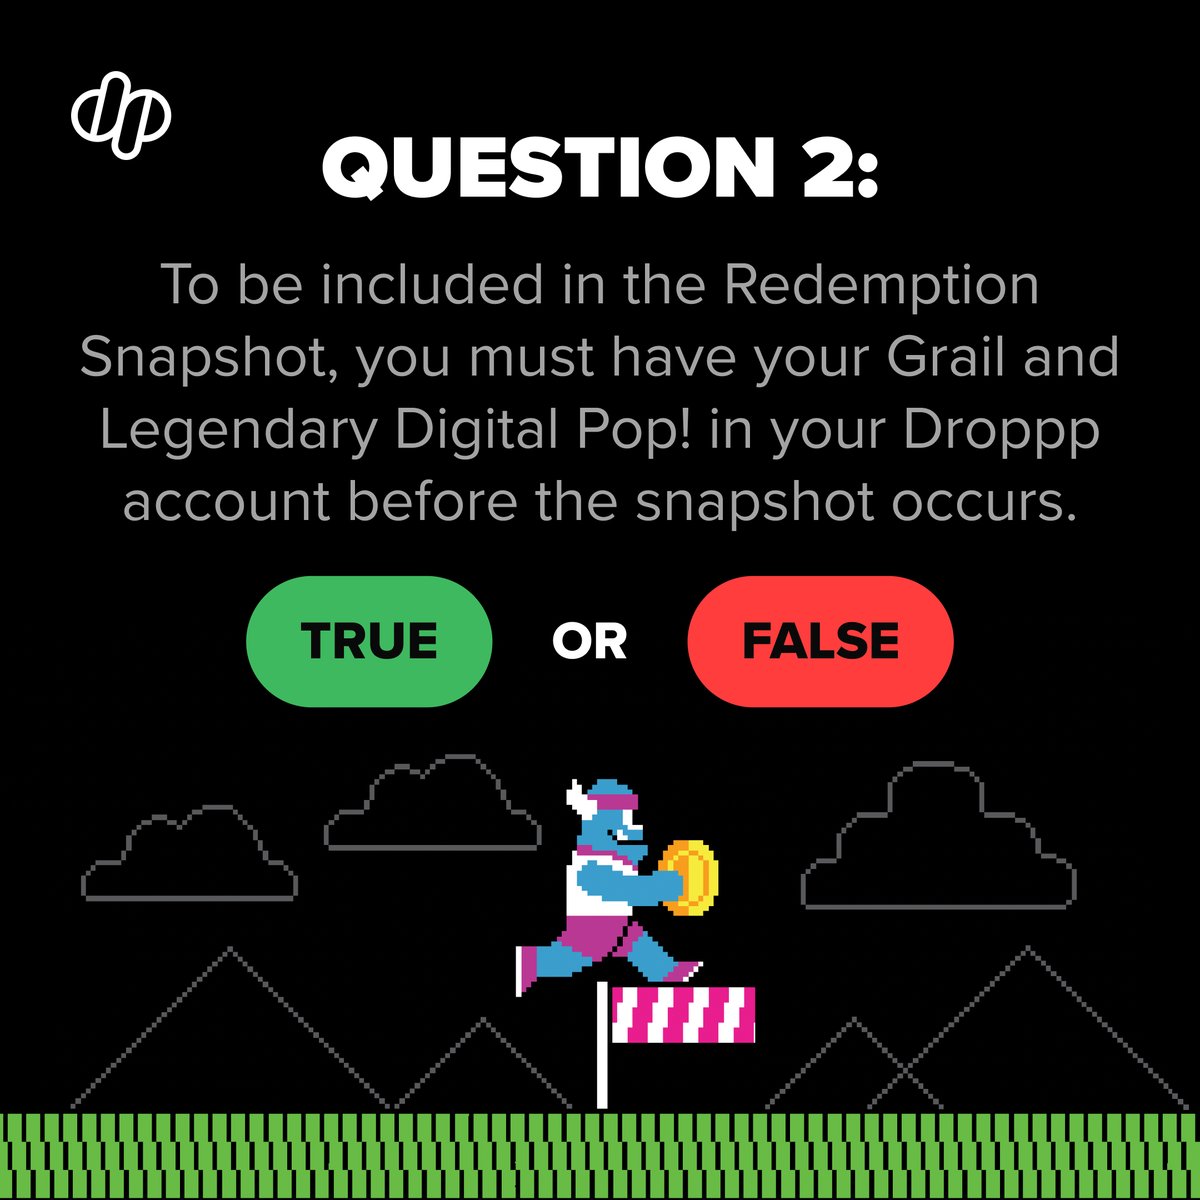 Funkoween Series 1 Giveaway: Redemption Trivia Question 2! We’re giving away 7 Funkoween Series 1 Premium Packs to 7 lucky winners! How to enter: - Comment on the post with the answer to the trivia question, and be sure to tag a friend! - Follow us on @dropppio! - Like and